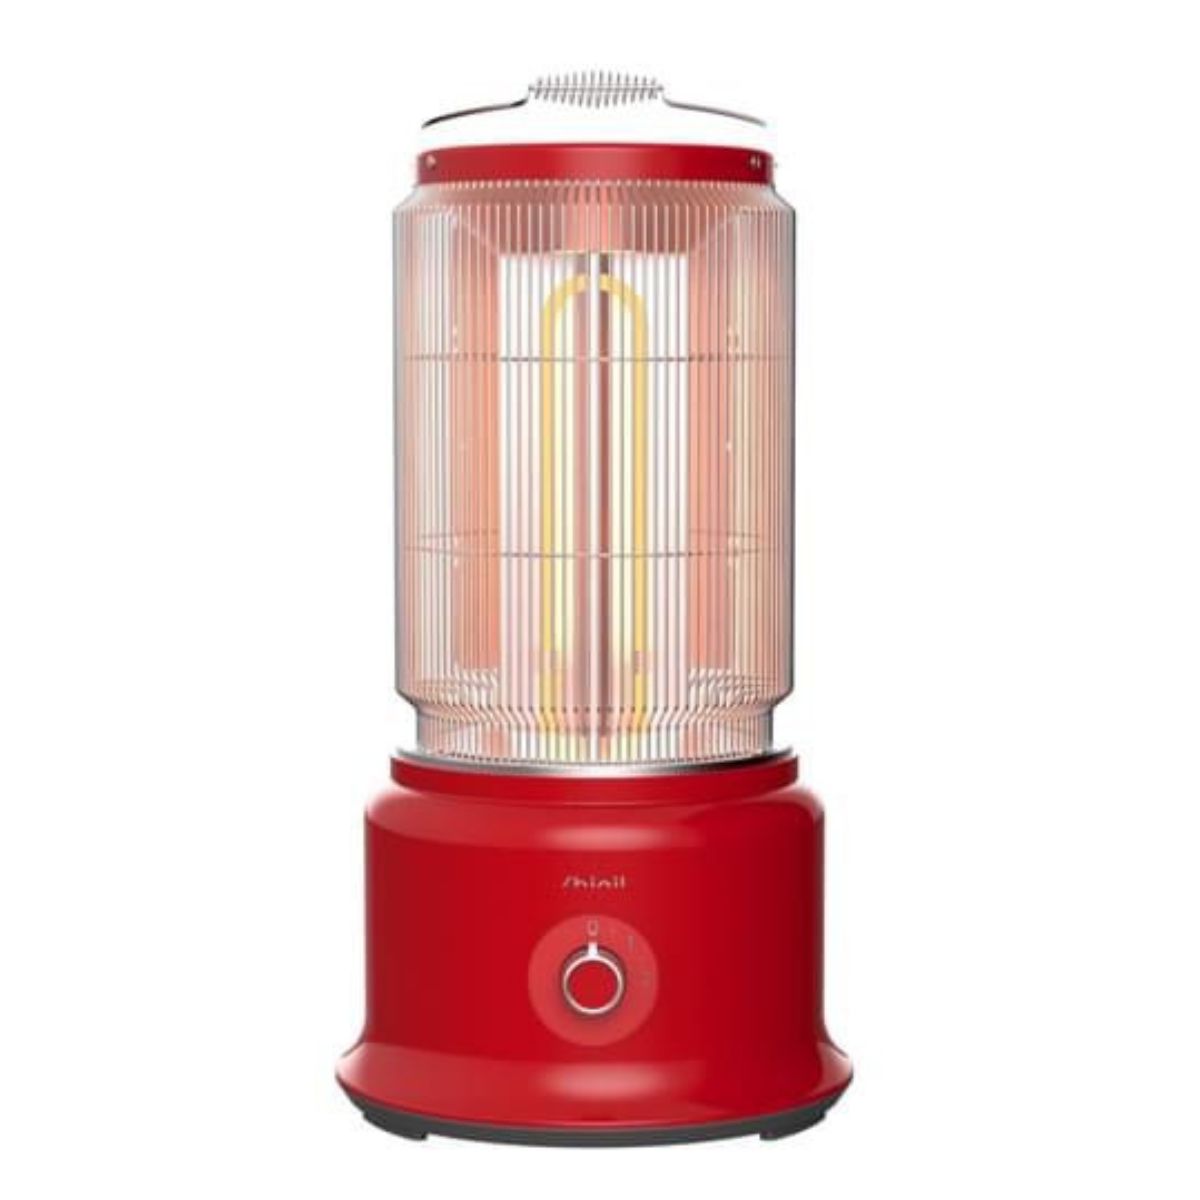 New Day Shinil - Cylindrical Carbon Heater - Red